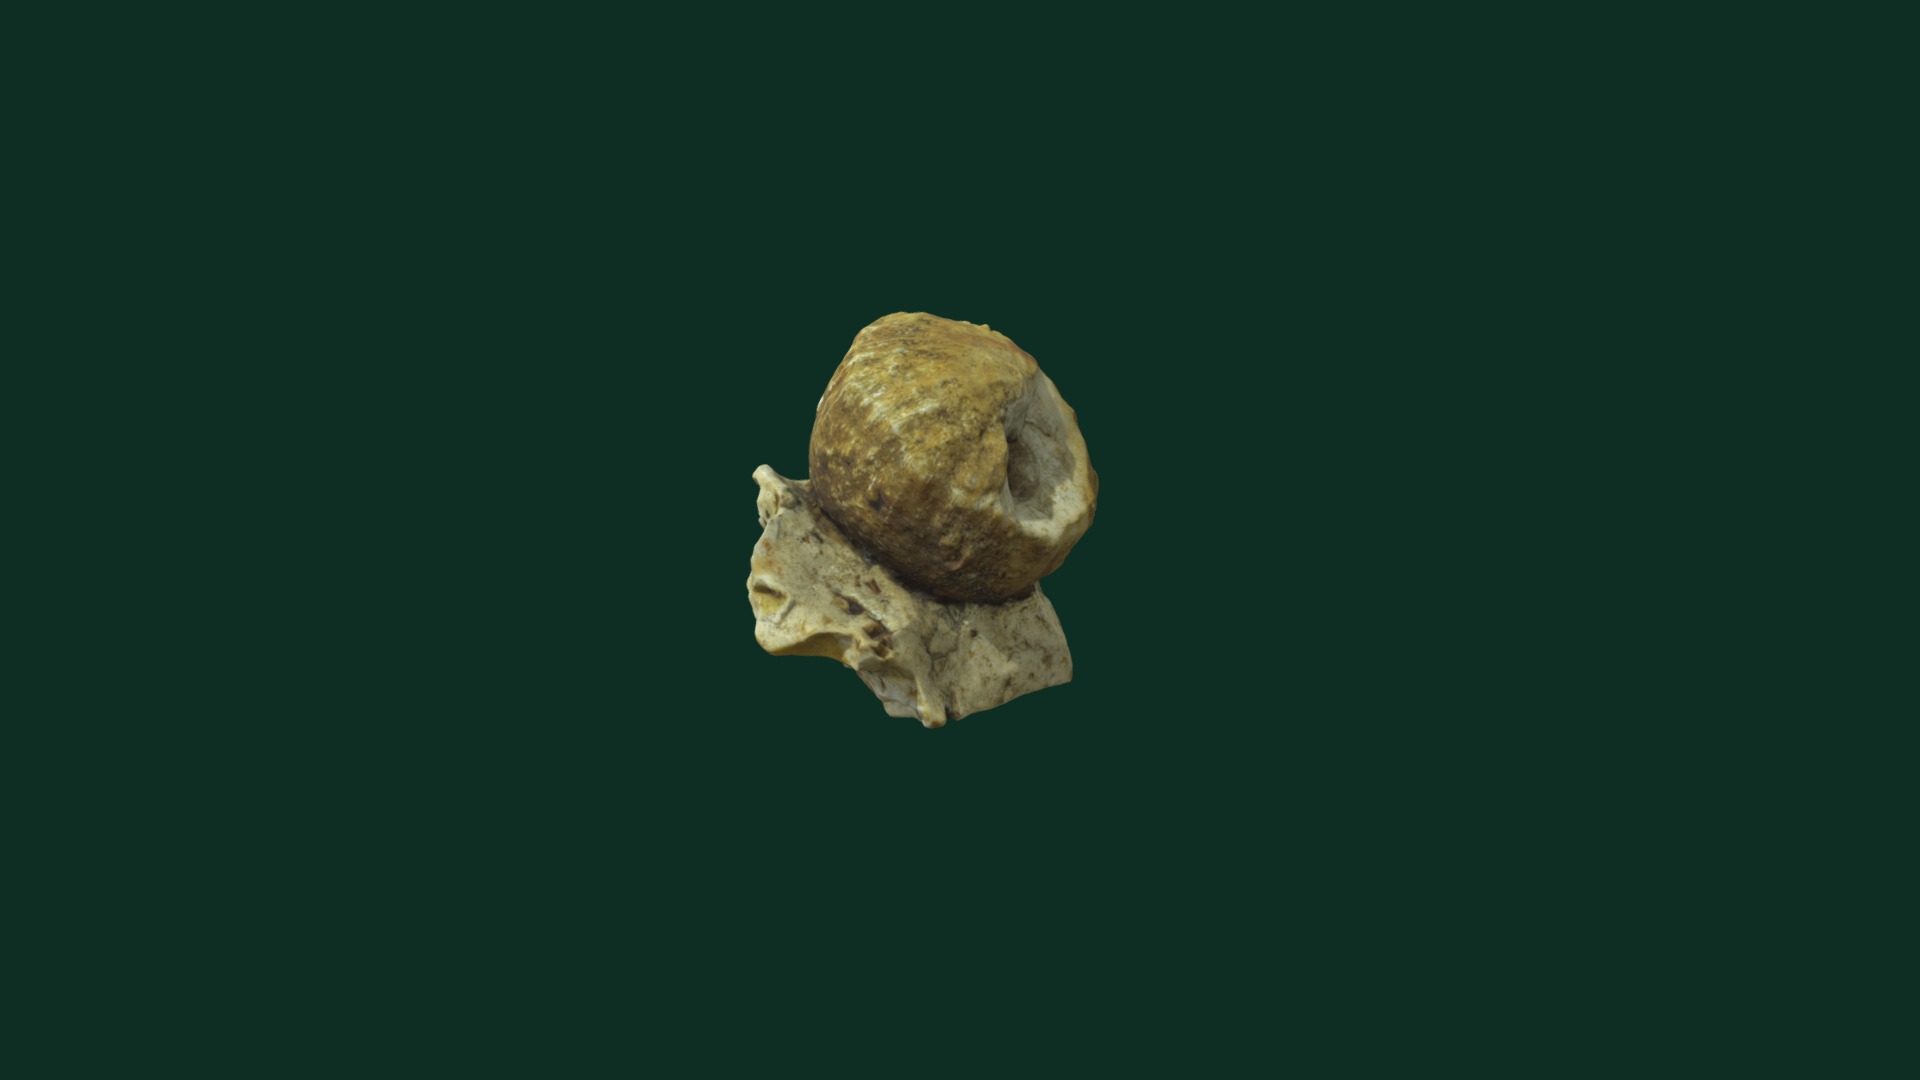 3D model Dichocrinus plicatus - This is a 3D model of the Dichocrinus plicatus. The 3D model is about a mushroom on a green background.